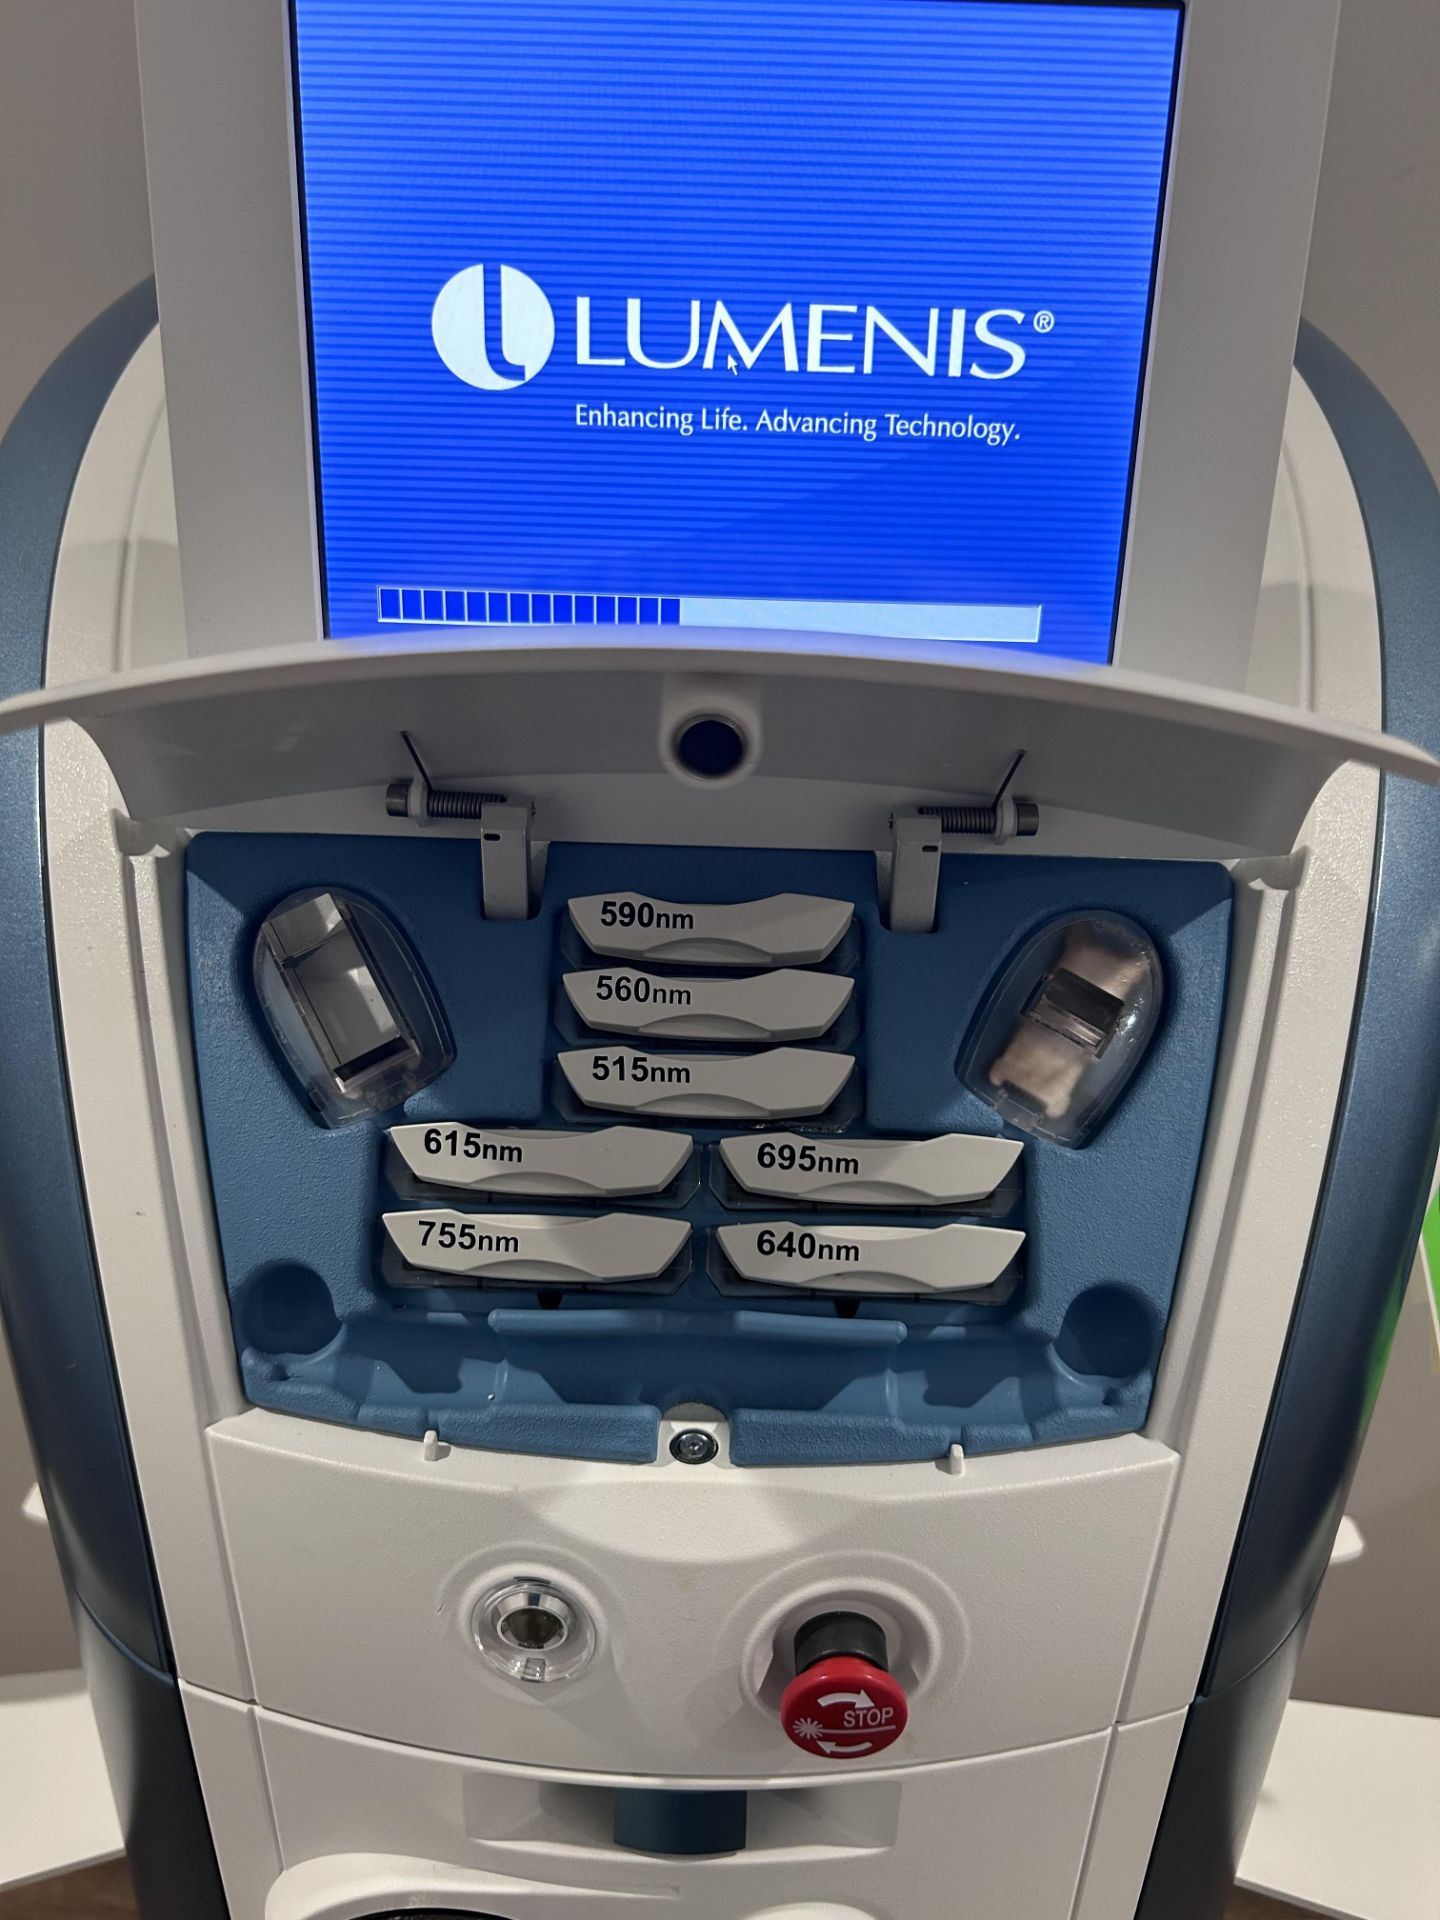 LUMENIS mod. M22 IPL and Laser Skin Resurfacing Machine with accessories, consumables - Image 2 of 9